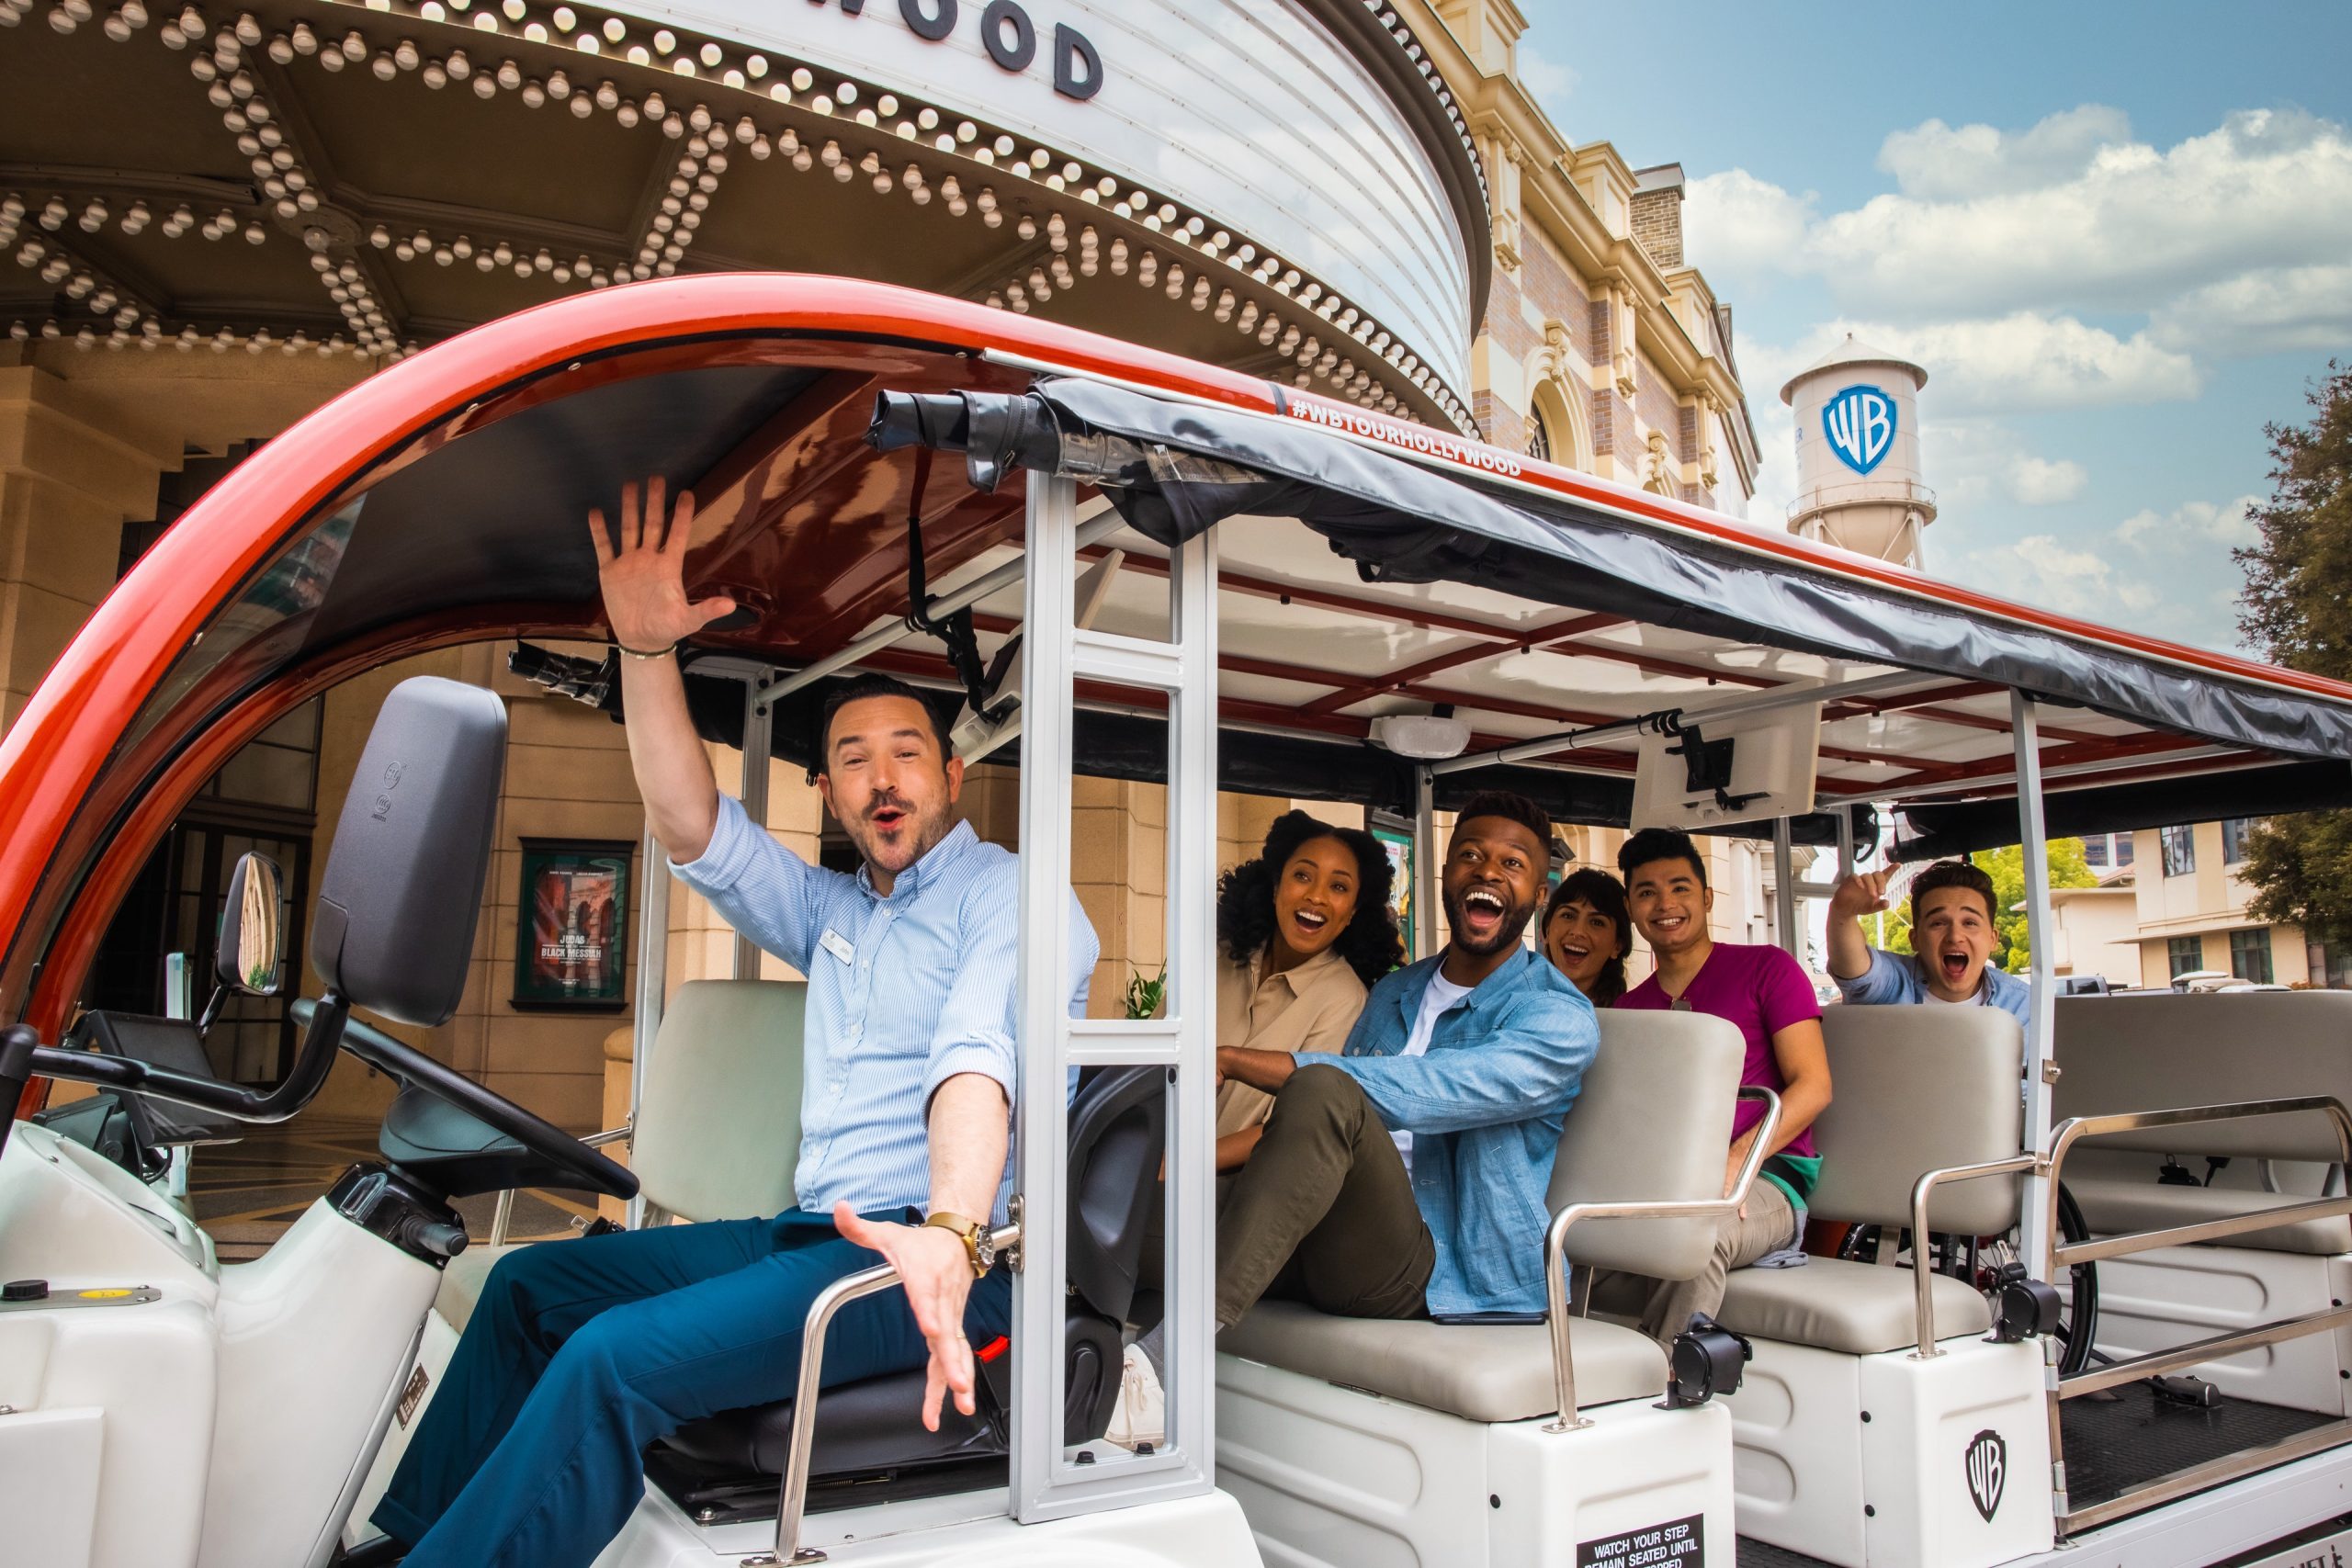 Studio tour cart with guest